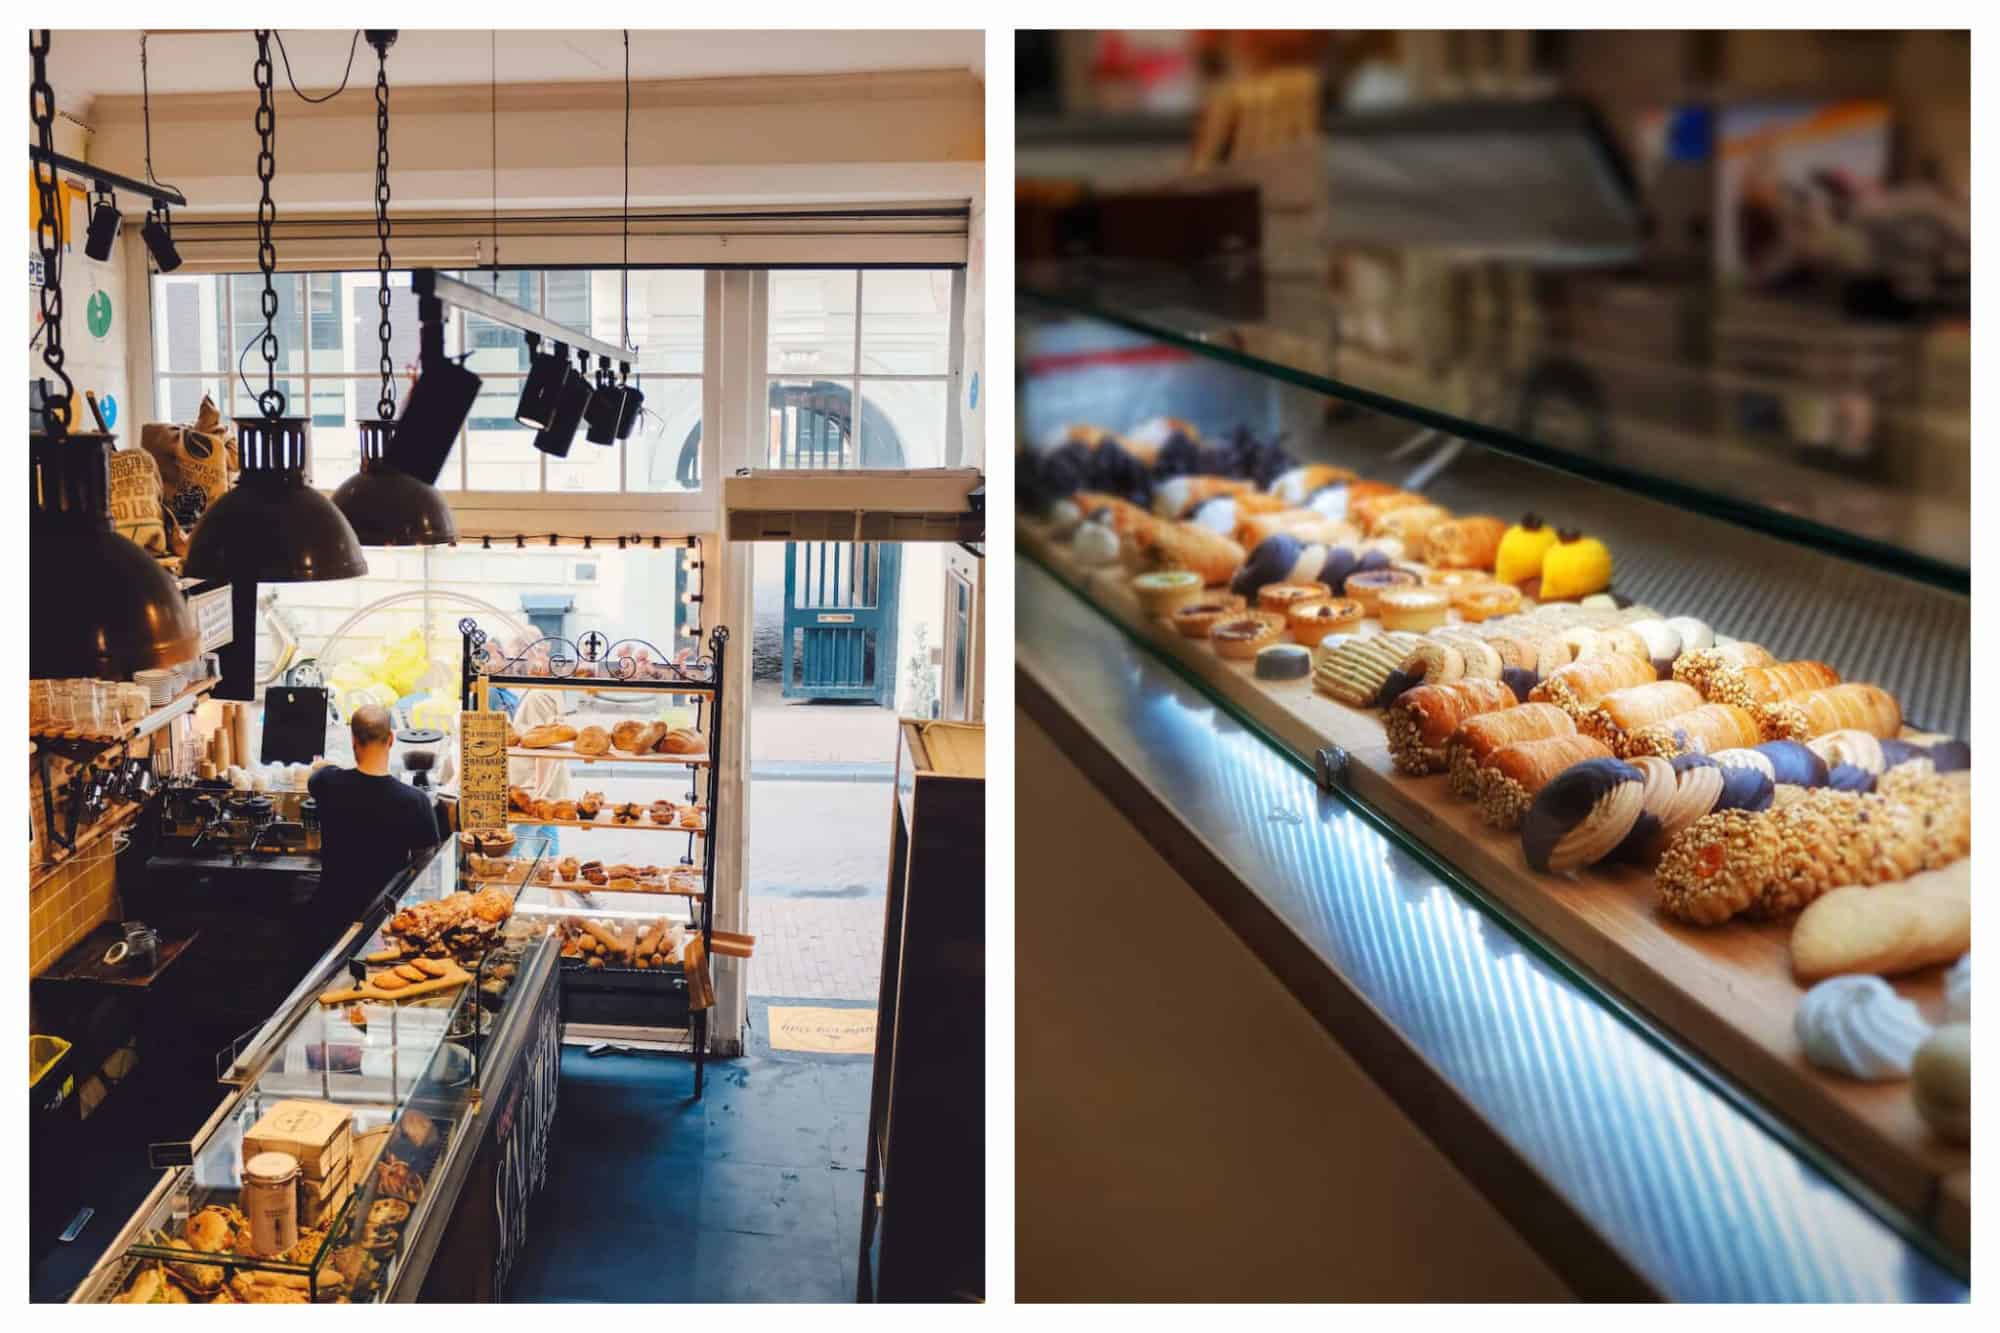 Left: On overhead view of the inside of a bakery from the inside looking out, baked goods and assorted products can be seen in the shop, Right: Fresh baked pastries and desserts lay next to each other under a bright light on a counter.